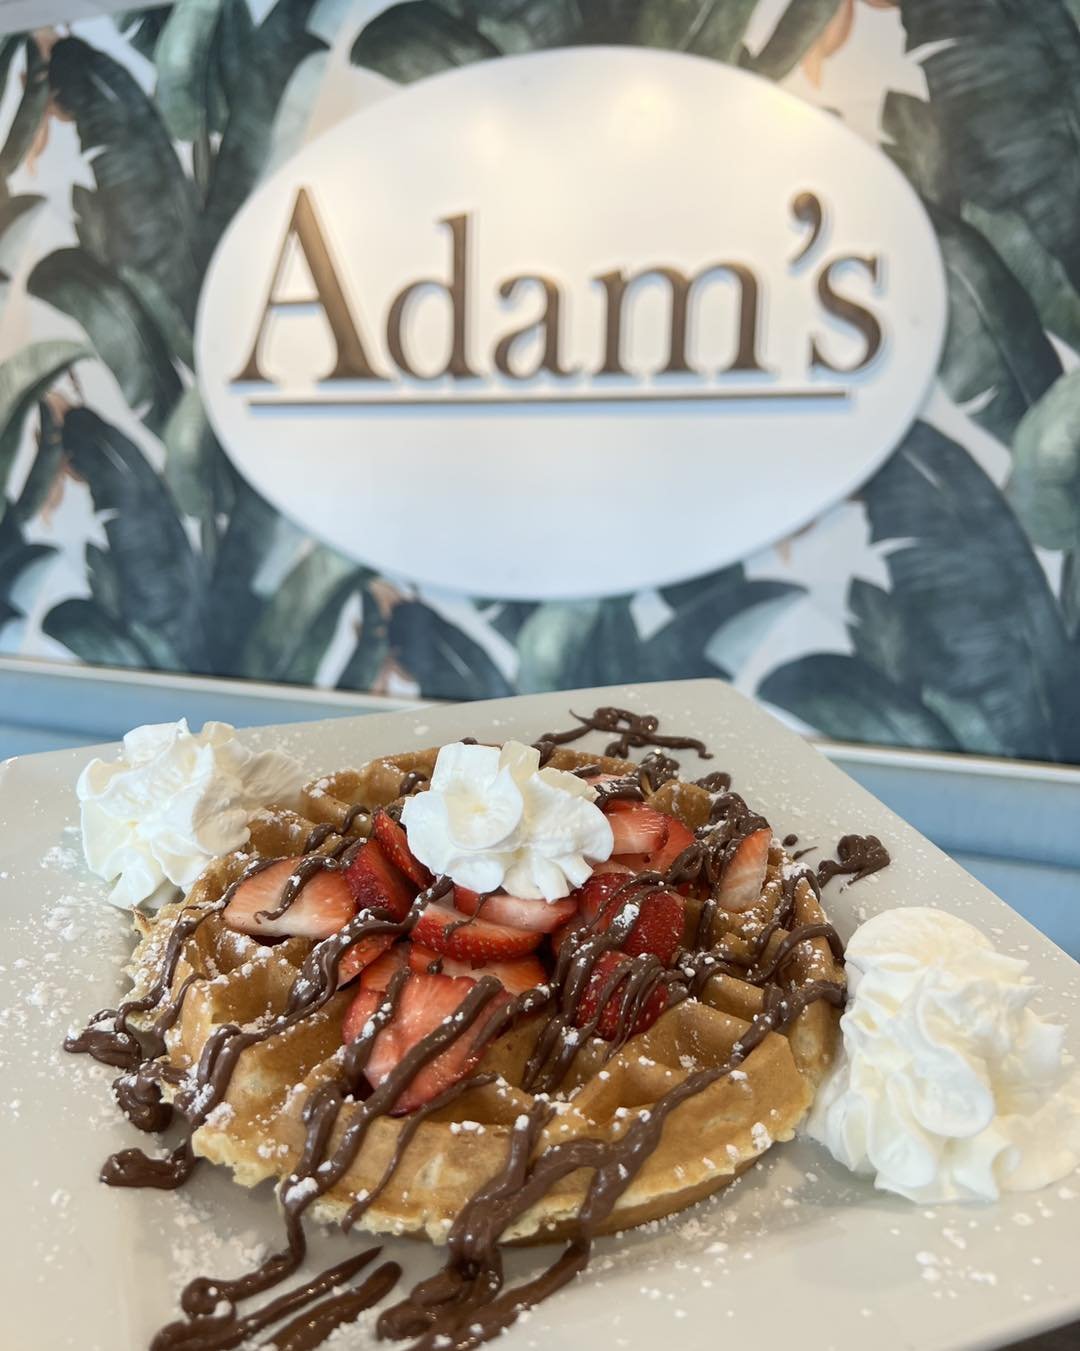 How good does this waffle look??? 😋😋😋
Open 8am-12pm in North Wildwood